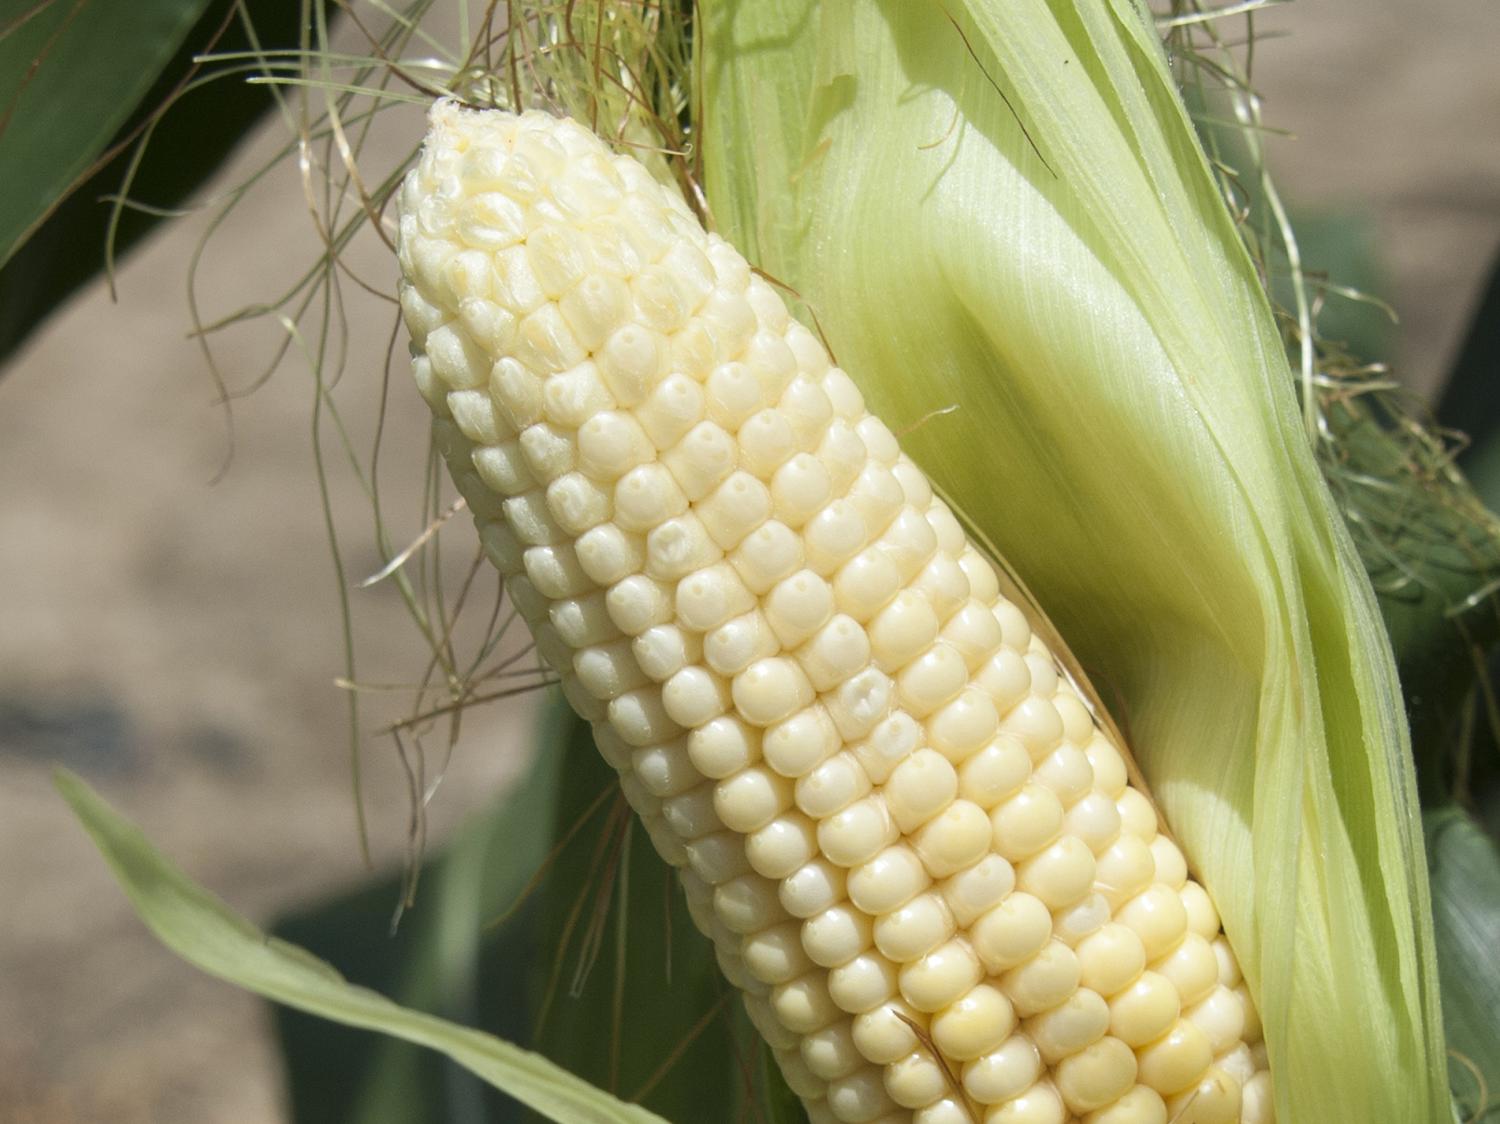 A variety of stresses, including saturated soils, can cause kernels at the tips of corn ears not to fill out. This ear was photographed July 1, 2014, at Mississippi State University's R.R. Foil Plant Science Research Center in Starkville, Mississippi. (Photo by MSU Ag Communications/Kat Lawrence)